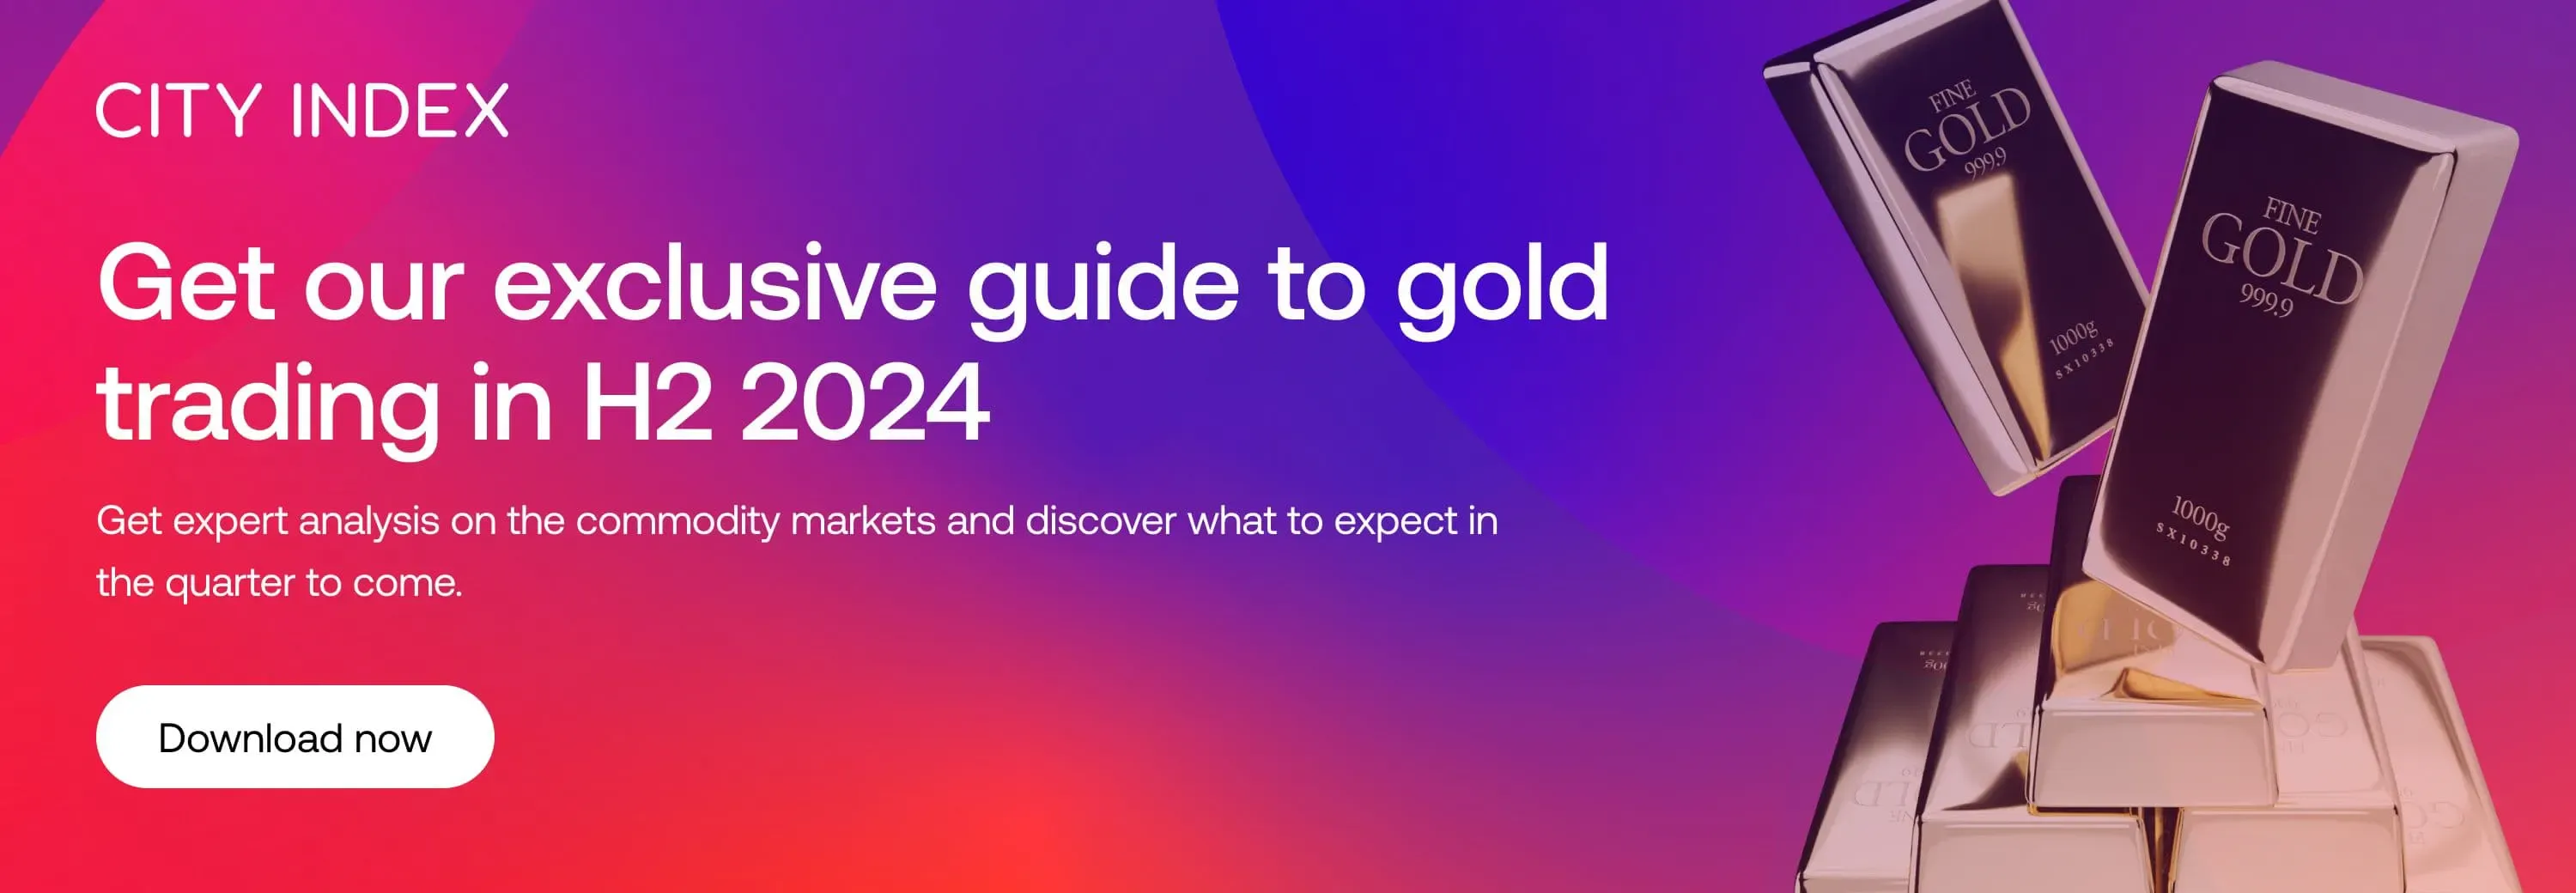 Get our exclusive guide to gold trading in H2 2024